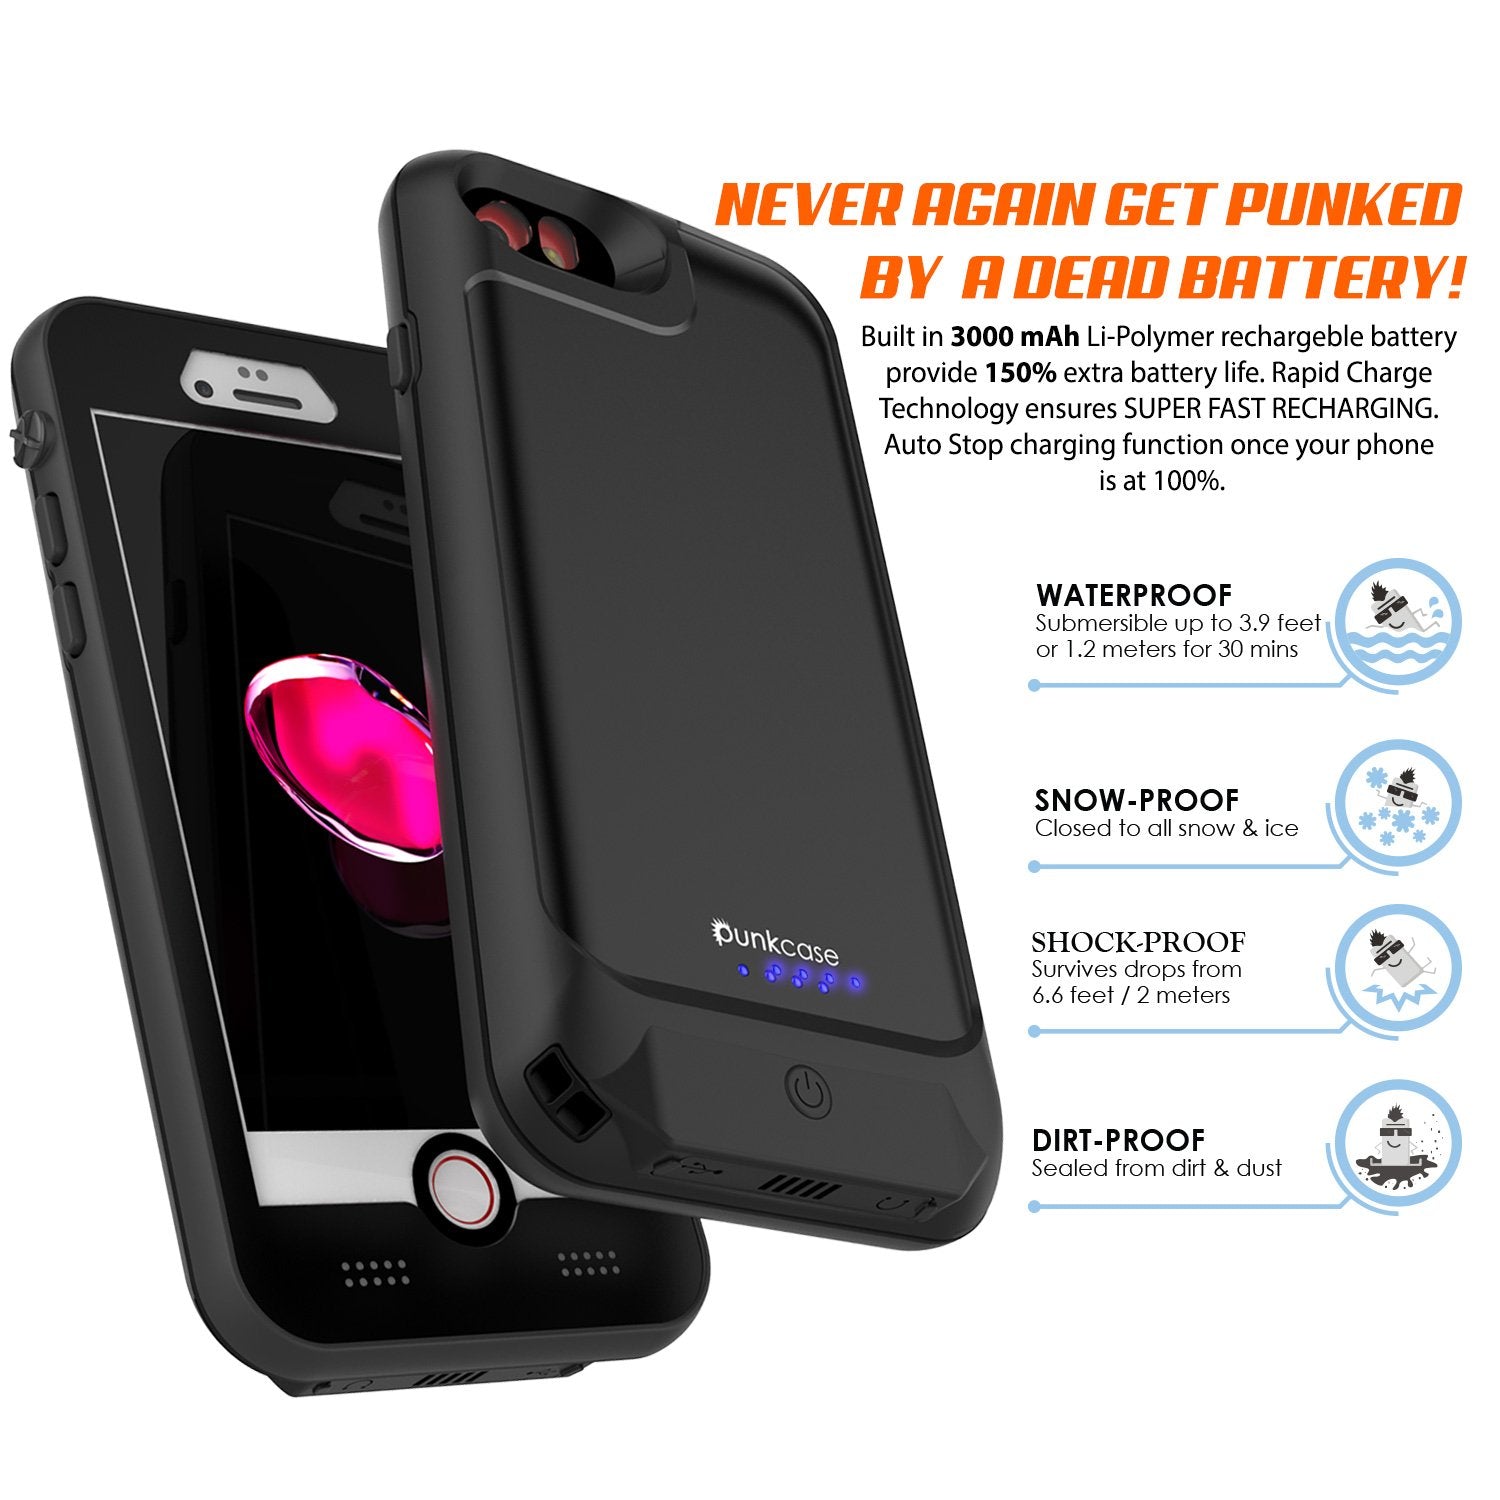 PunkJuice iPhone 7 Battery Case Black - Waterproof Slim Portable Power Juice Bank with 2750mAh High Capacity - Fastcharging - 120% Extra Battery Life - 3 Year EXCHANGE WARRANTY